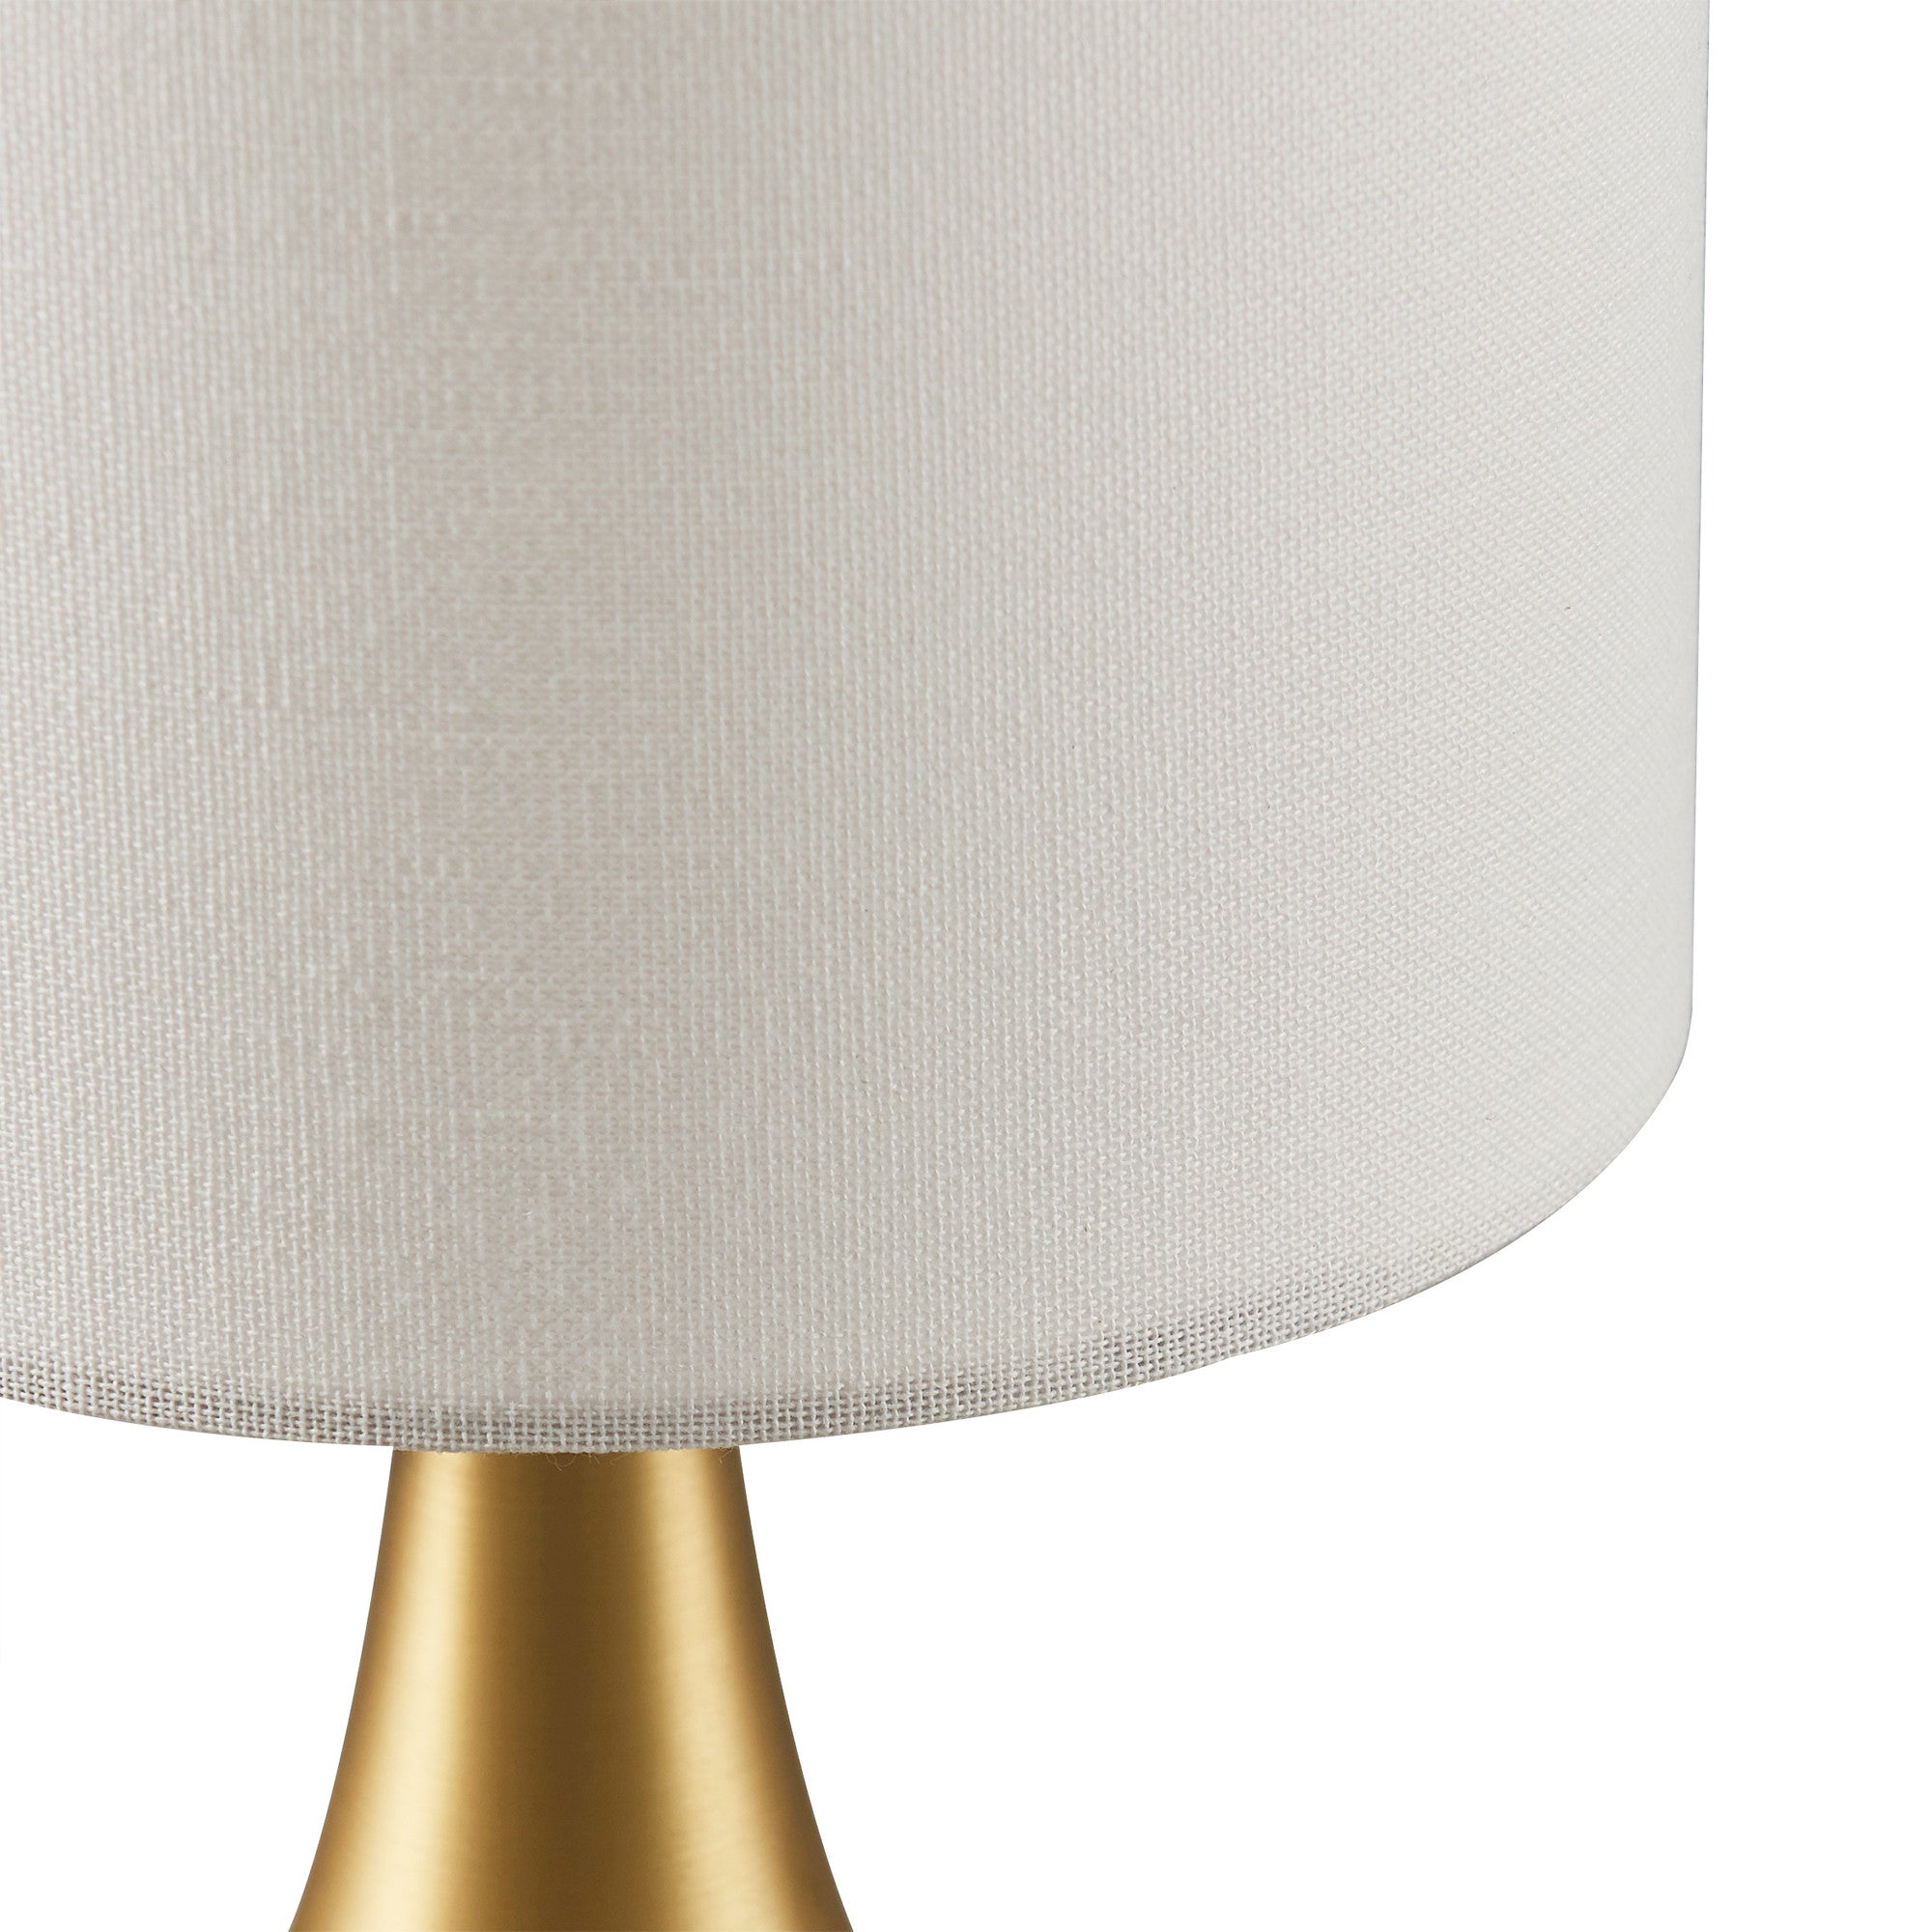 Teamson Home Sarah 15" Modern Metal Table Lamp with Touch Switch and Cream Shade, Polished Brass